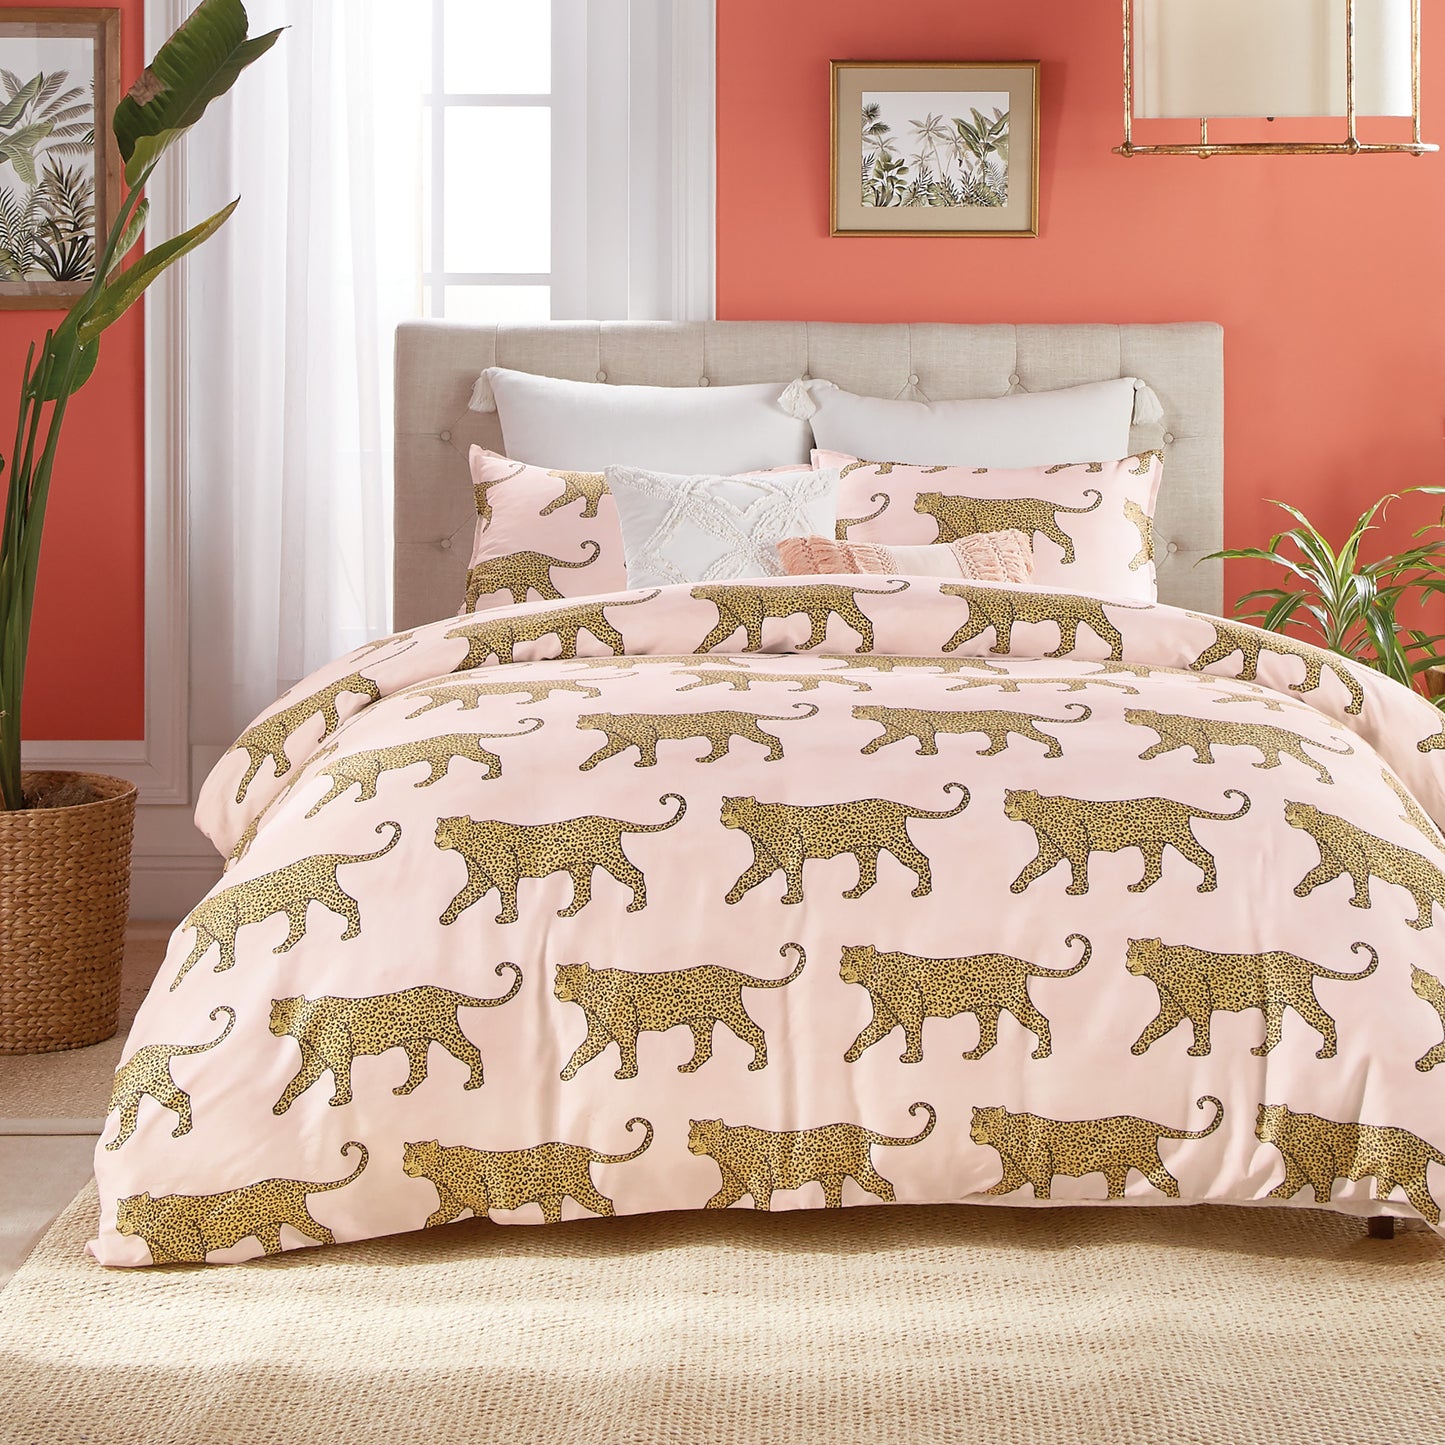 Peri Home Catwalk Comforter Bedding Collection